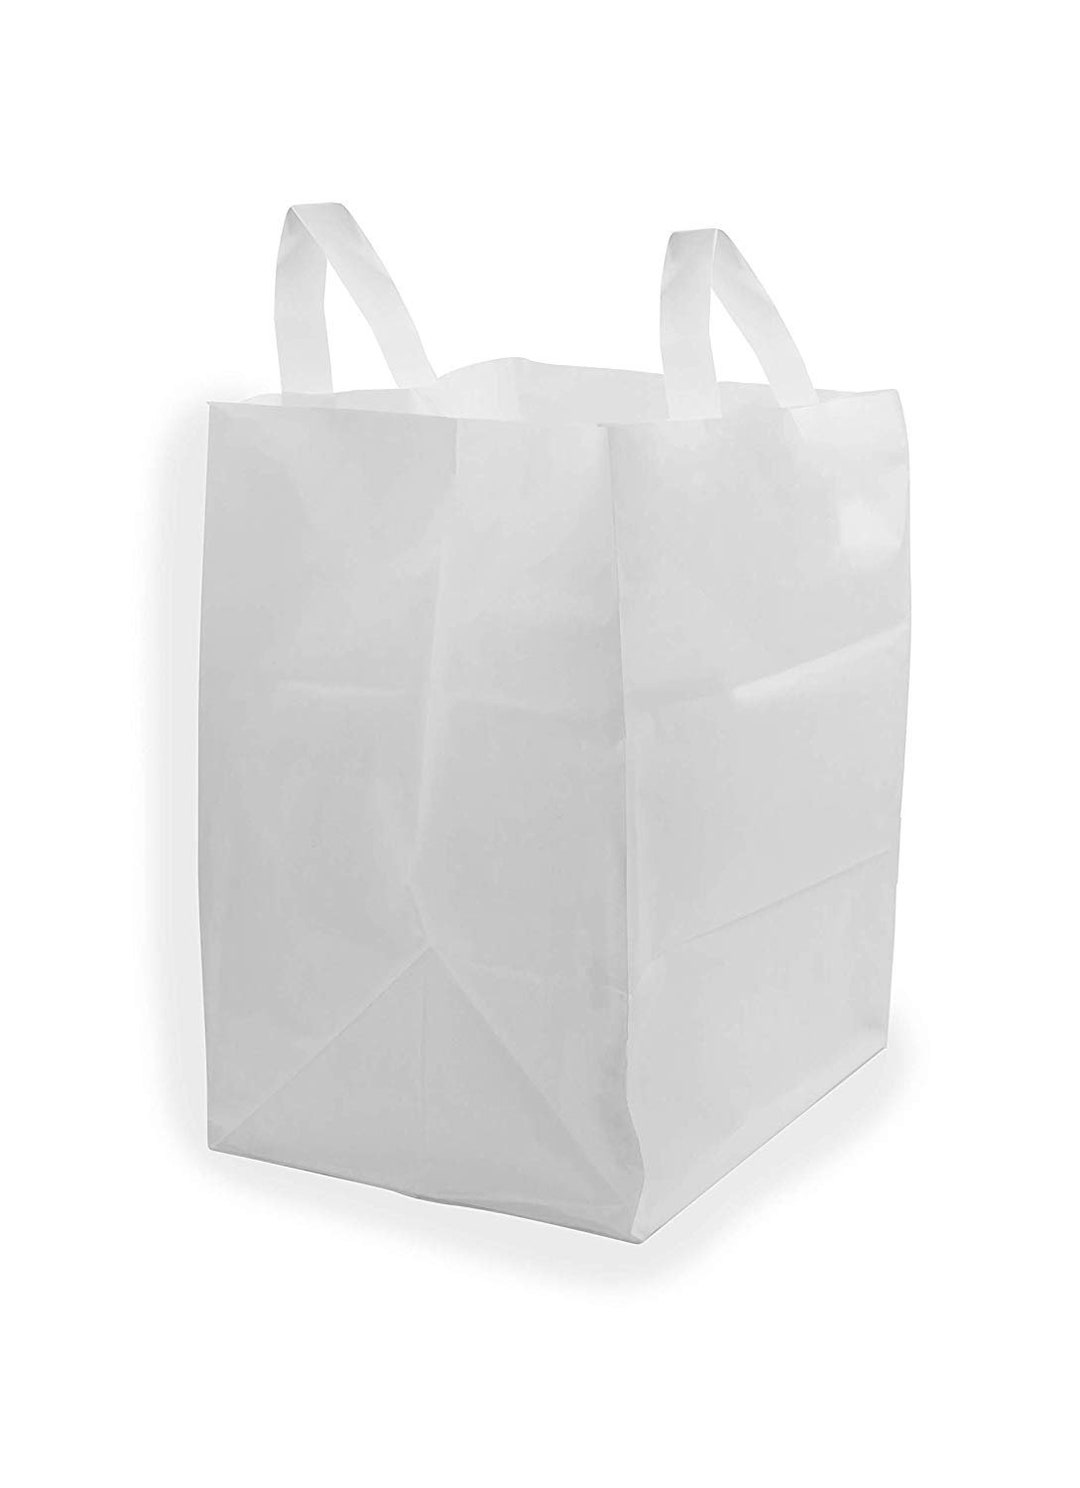 JS Frosted Plastic Shopping Gift Bags Large (16x6x12)- Quantity of 100  (Clear)